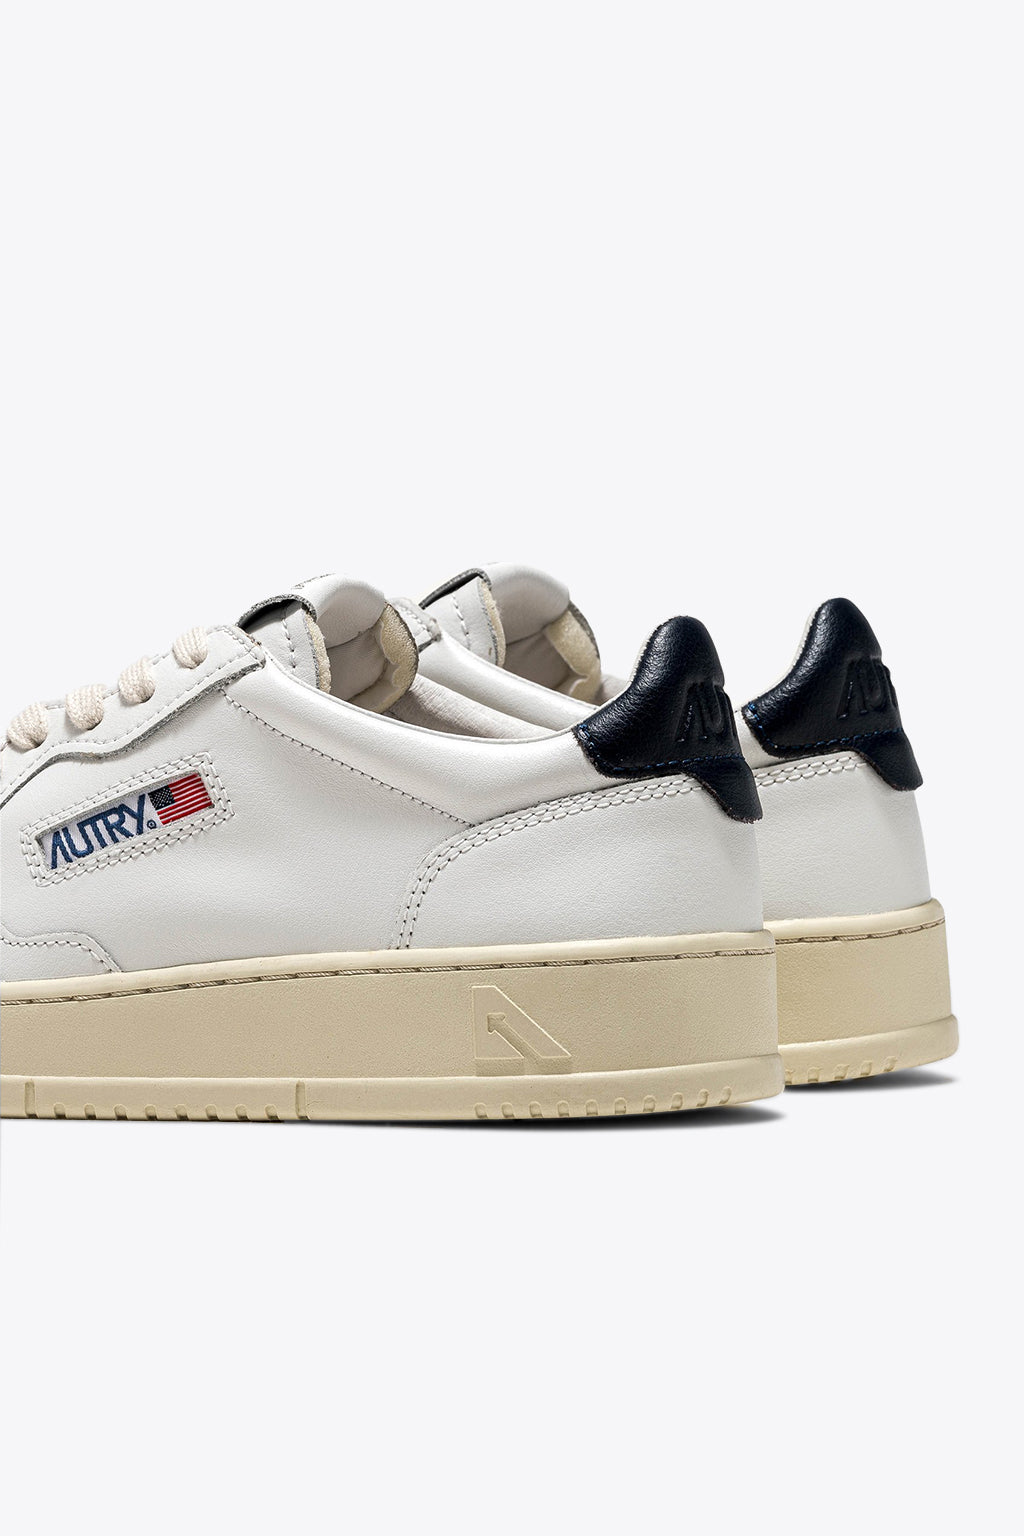 alt-image__White-leather-low-sneaker-with-dark-blue-tab---Medalist